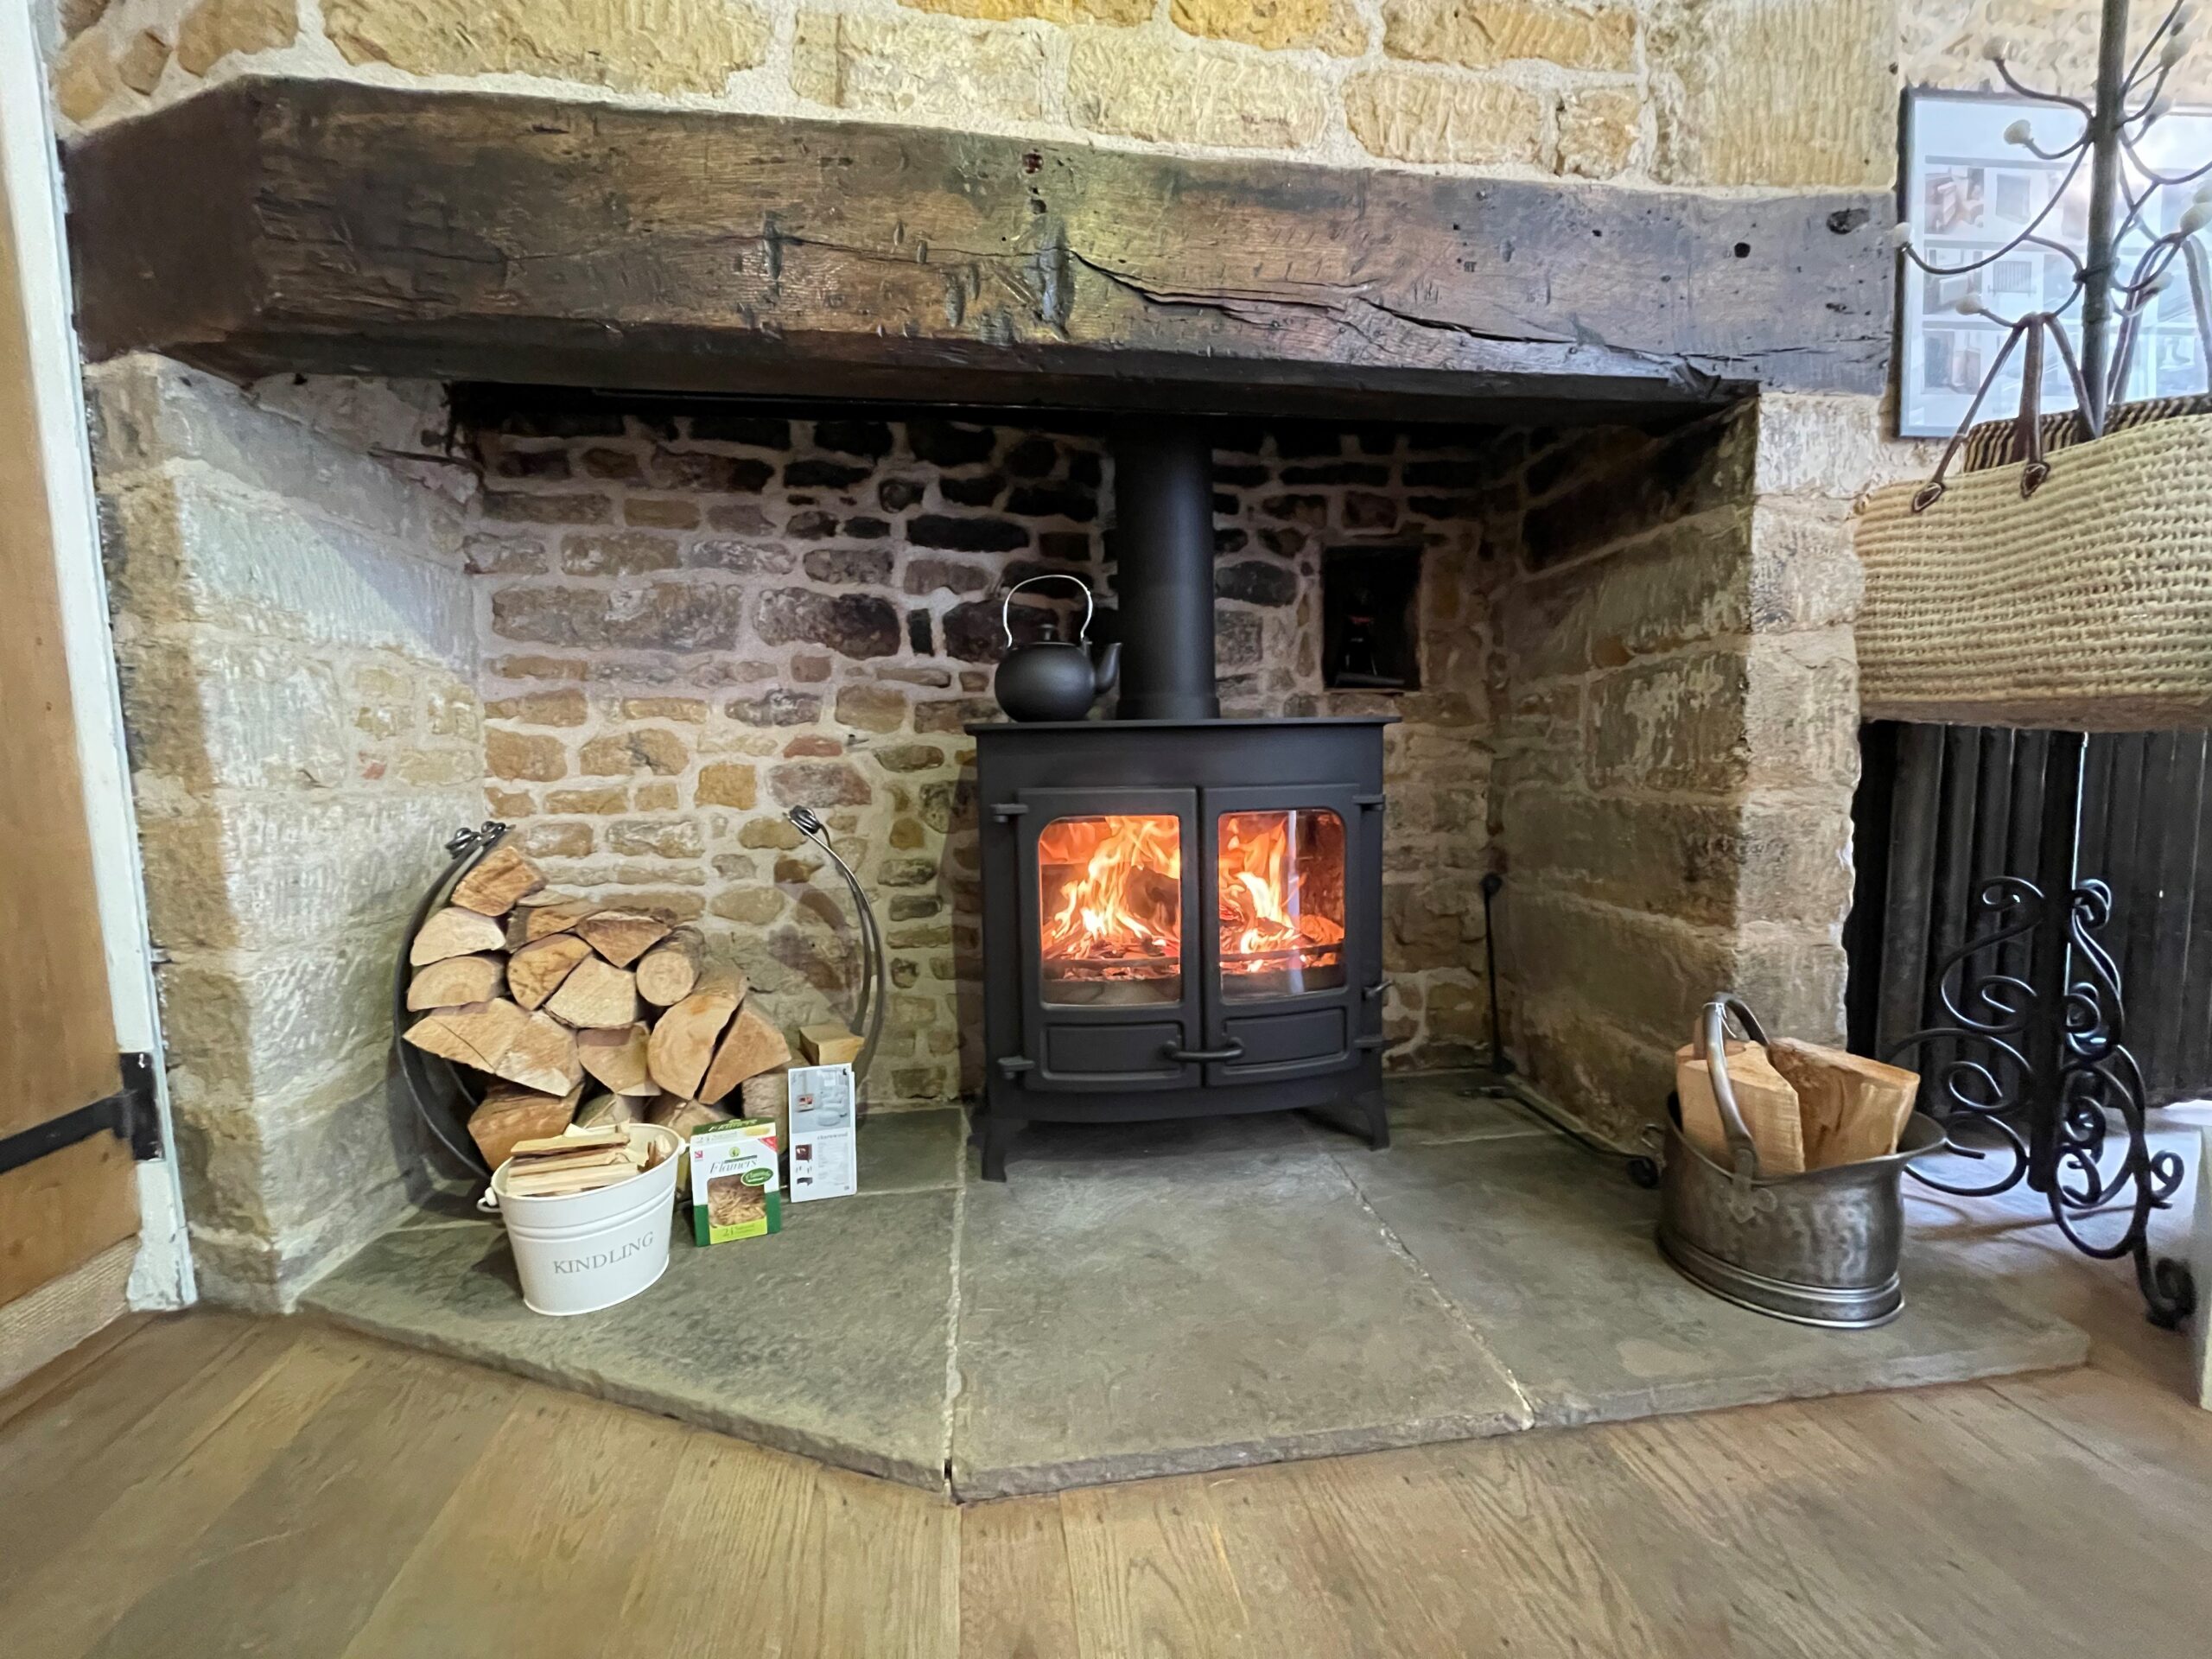 Buy Stove Parts & Stove Accessories: Parts To Maintain Log Burners